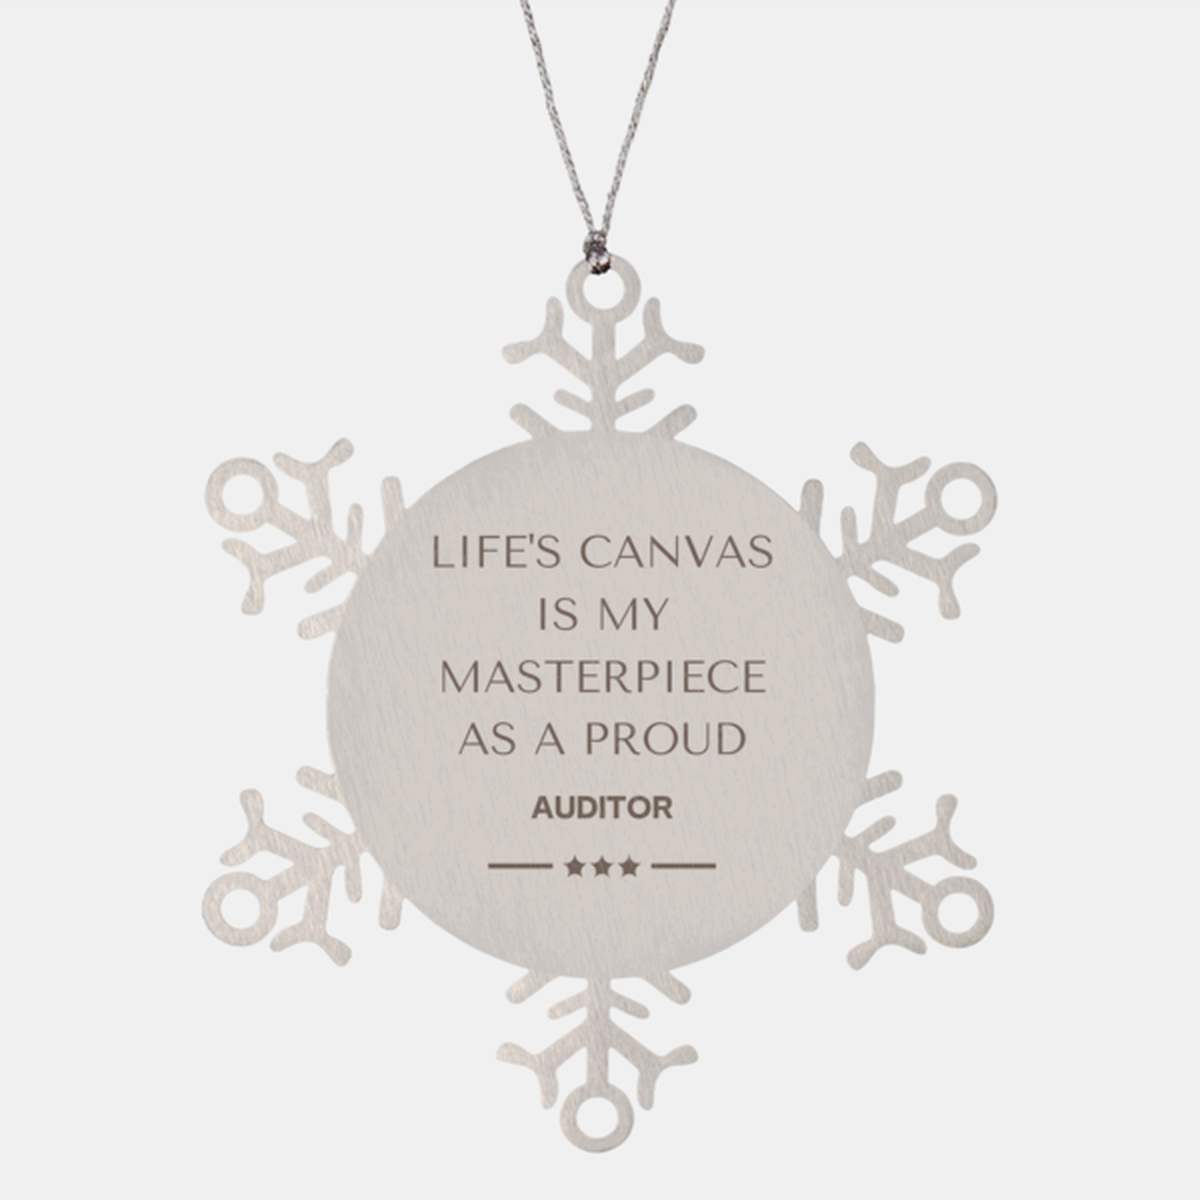 Proud Auditor Gifts, Life's canvas is my masterpiece, Epic Birthday Christmas Unique Snowflake Ornament For Auditor, Coworkers, Men, Women, Friends